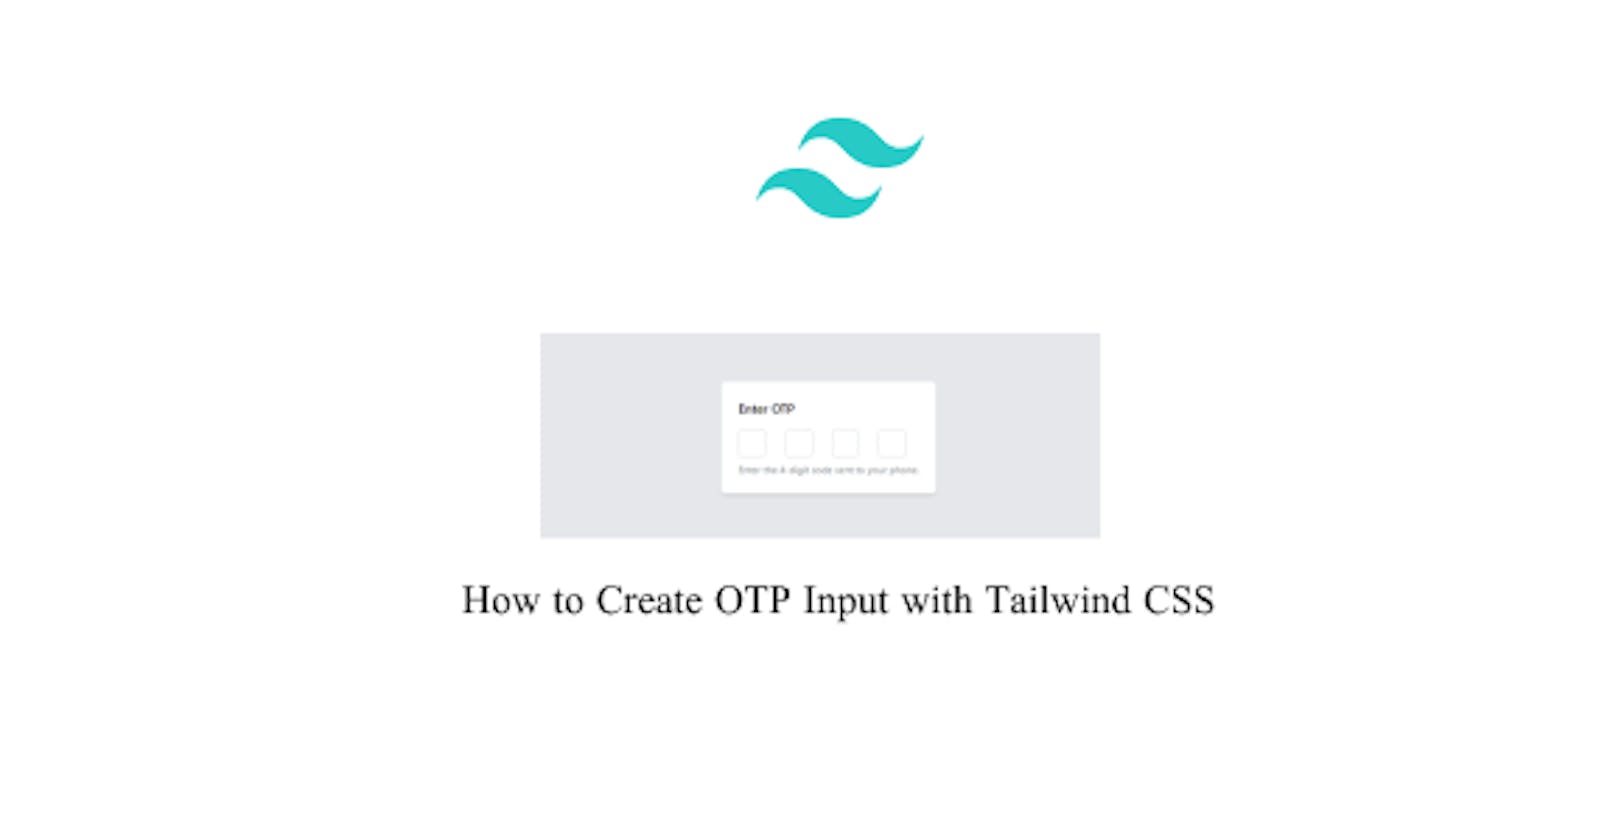 How to Create OTP Input with Tailwind CSS